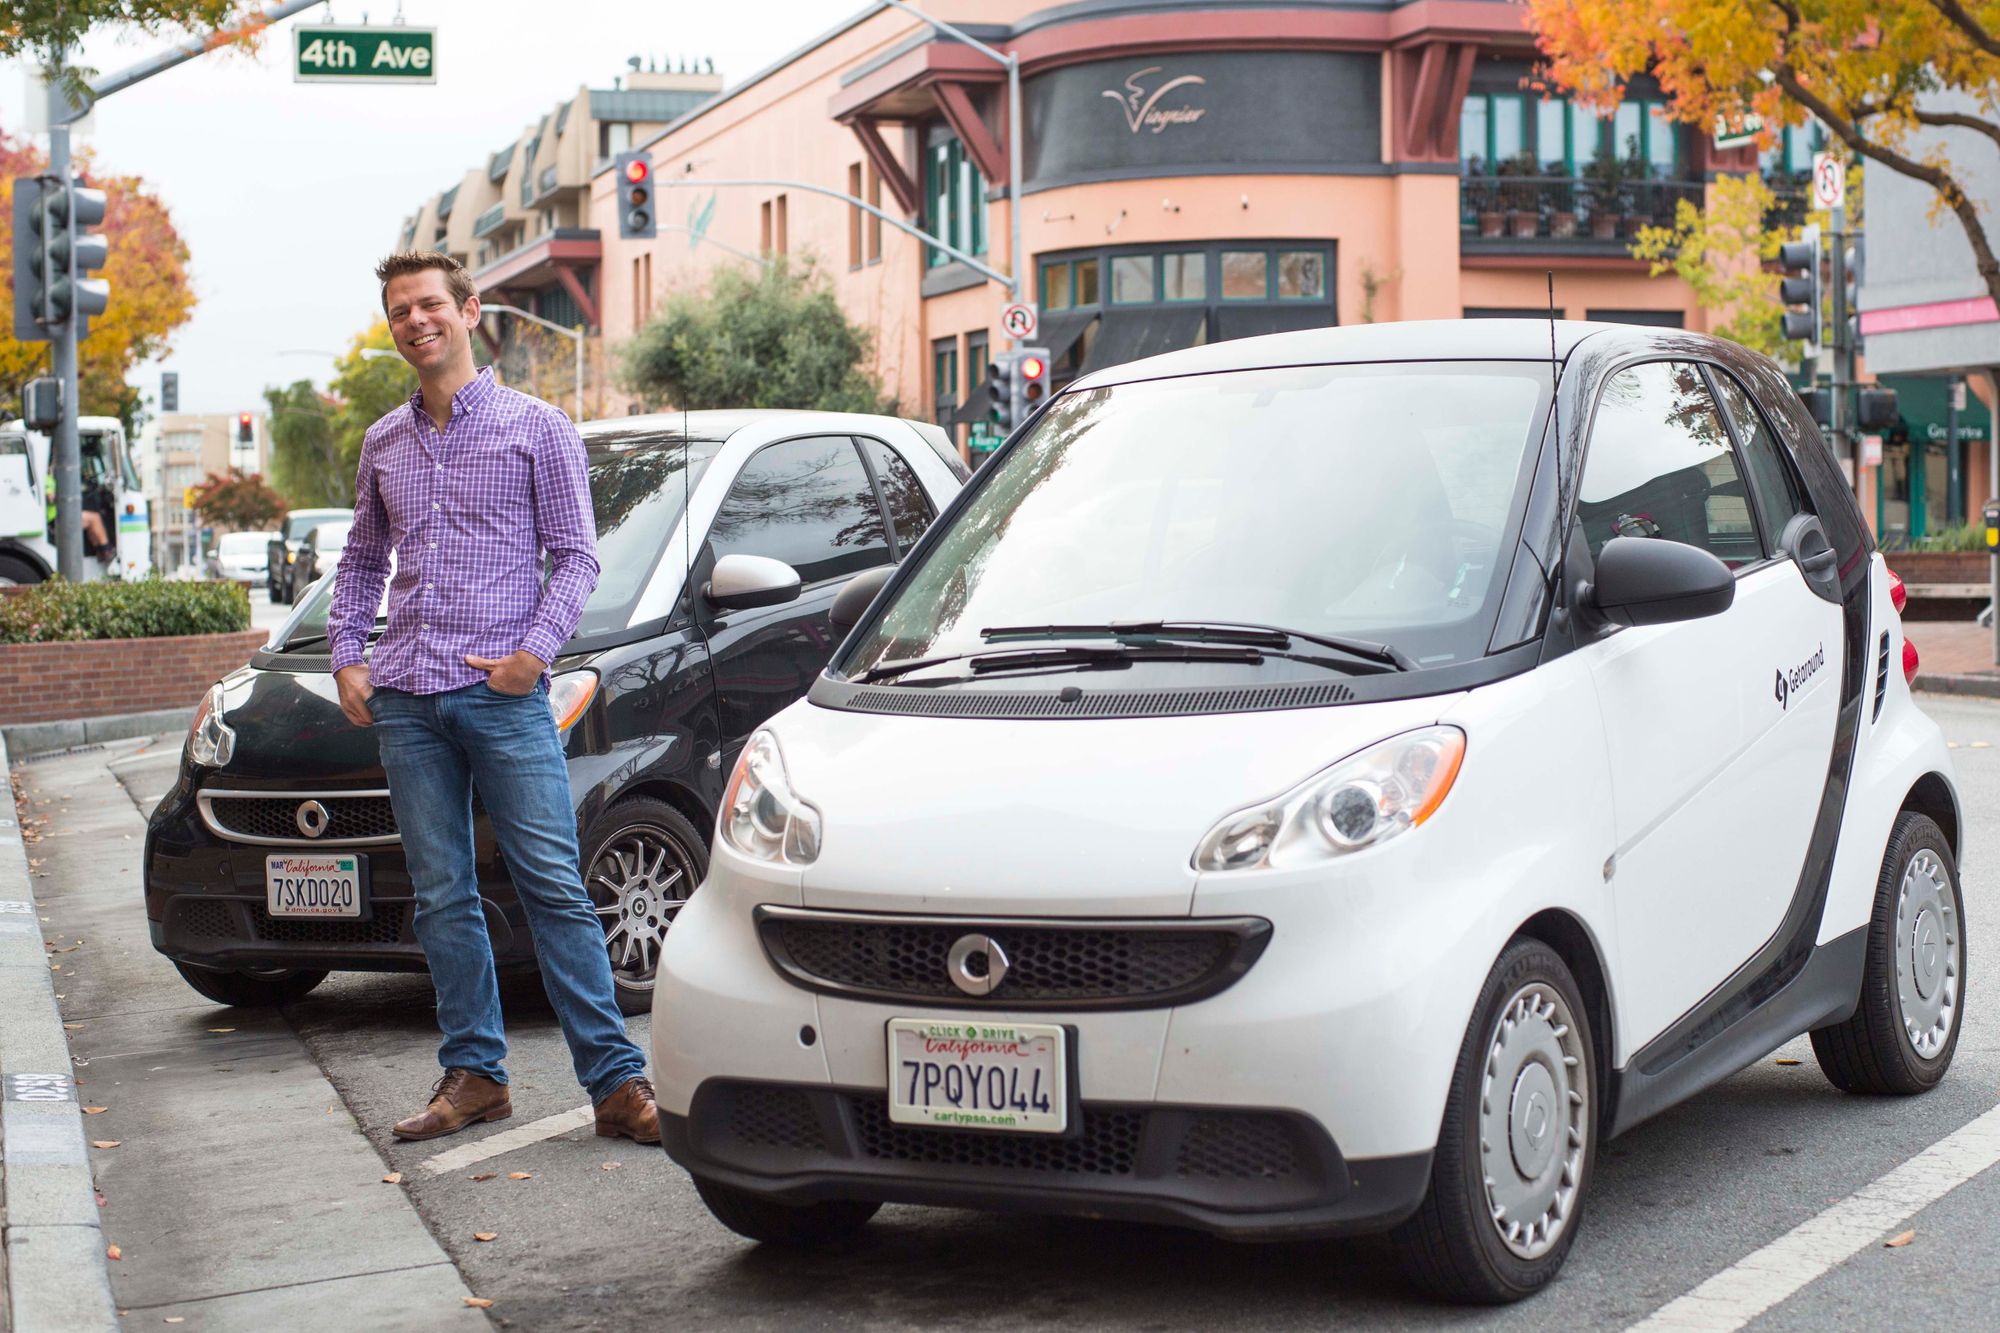 #GetaroundGainfully with these carsharing keys to success